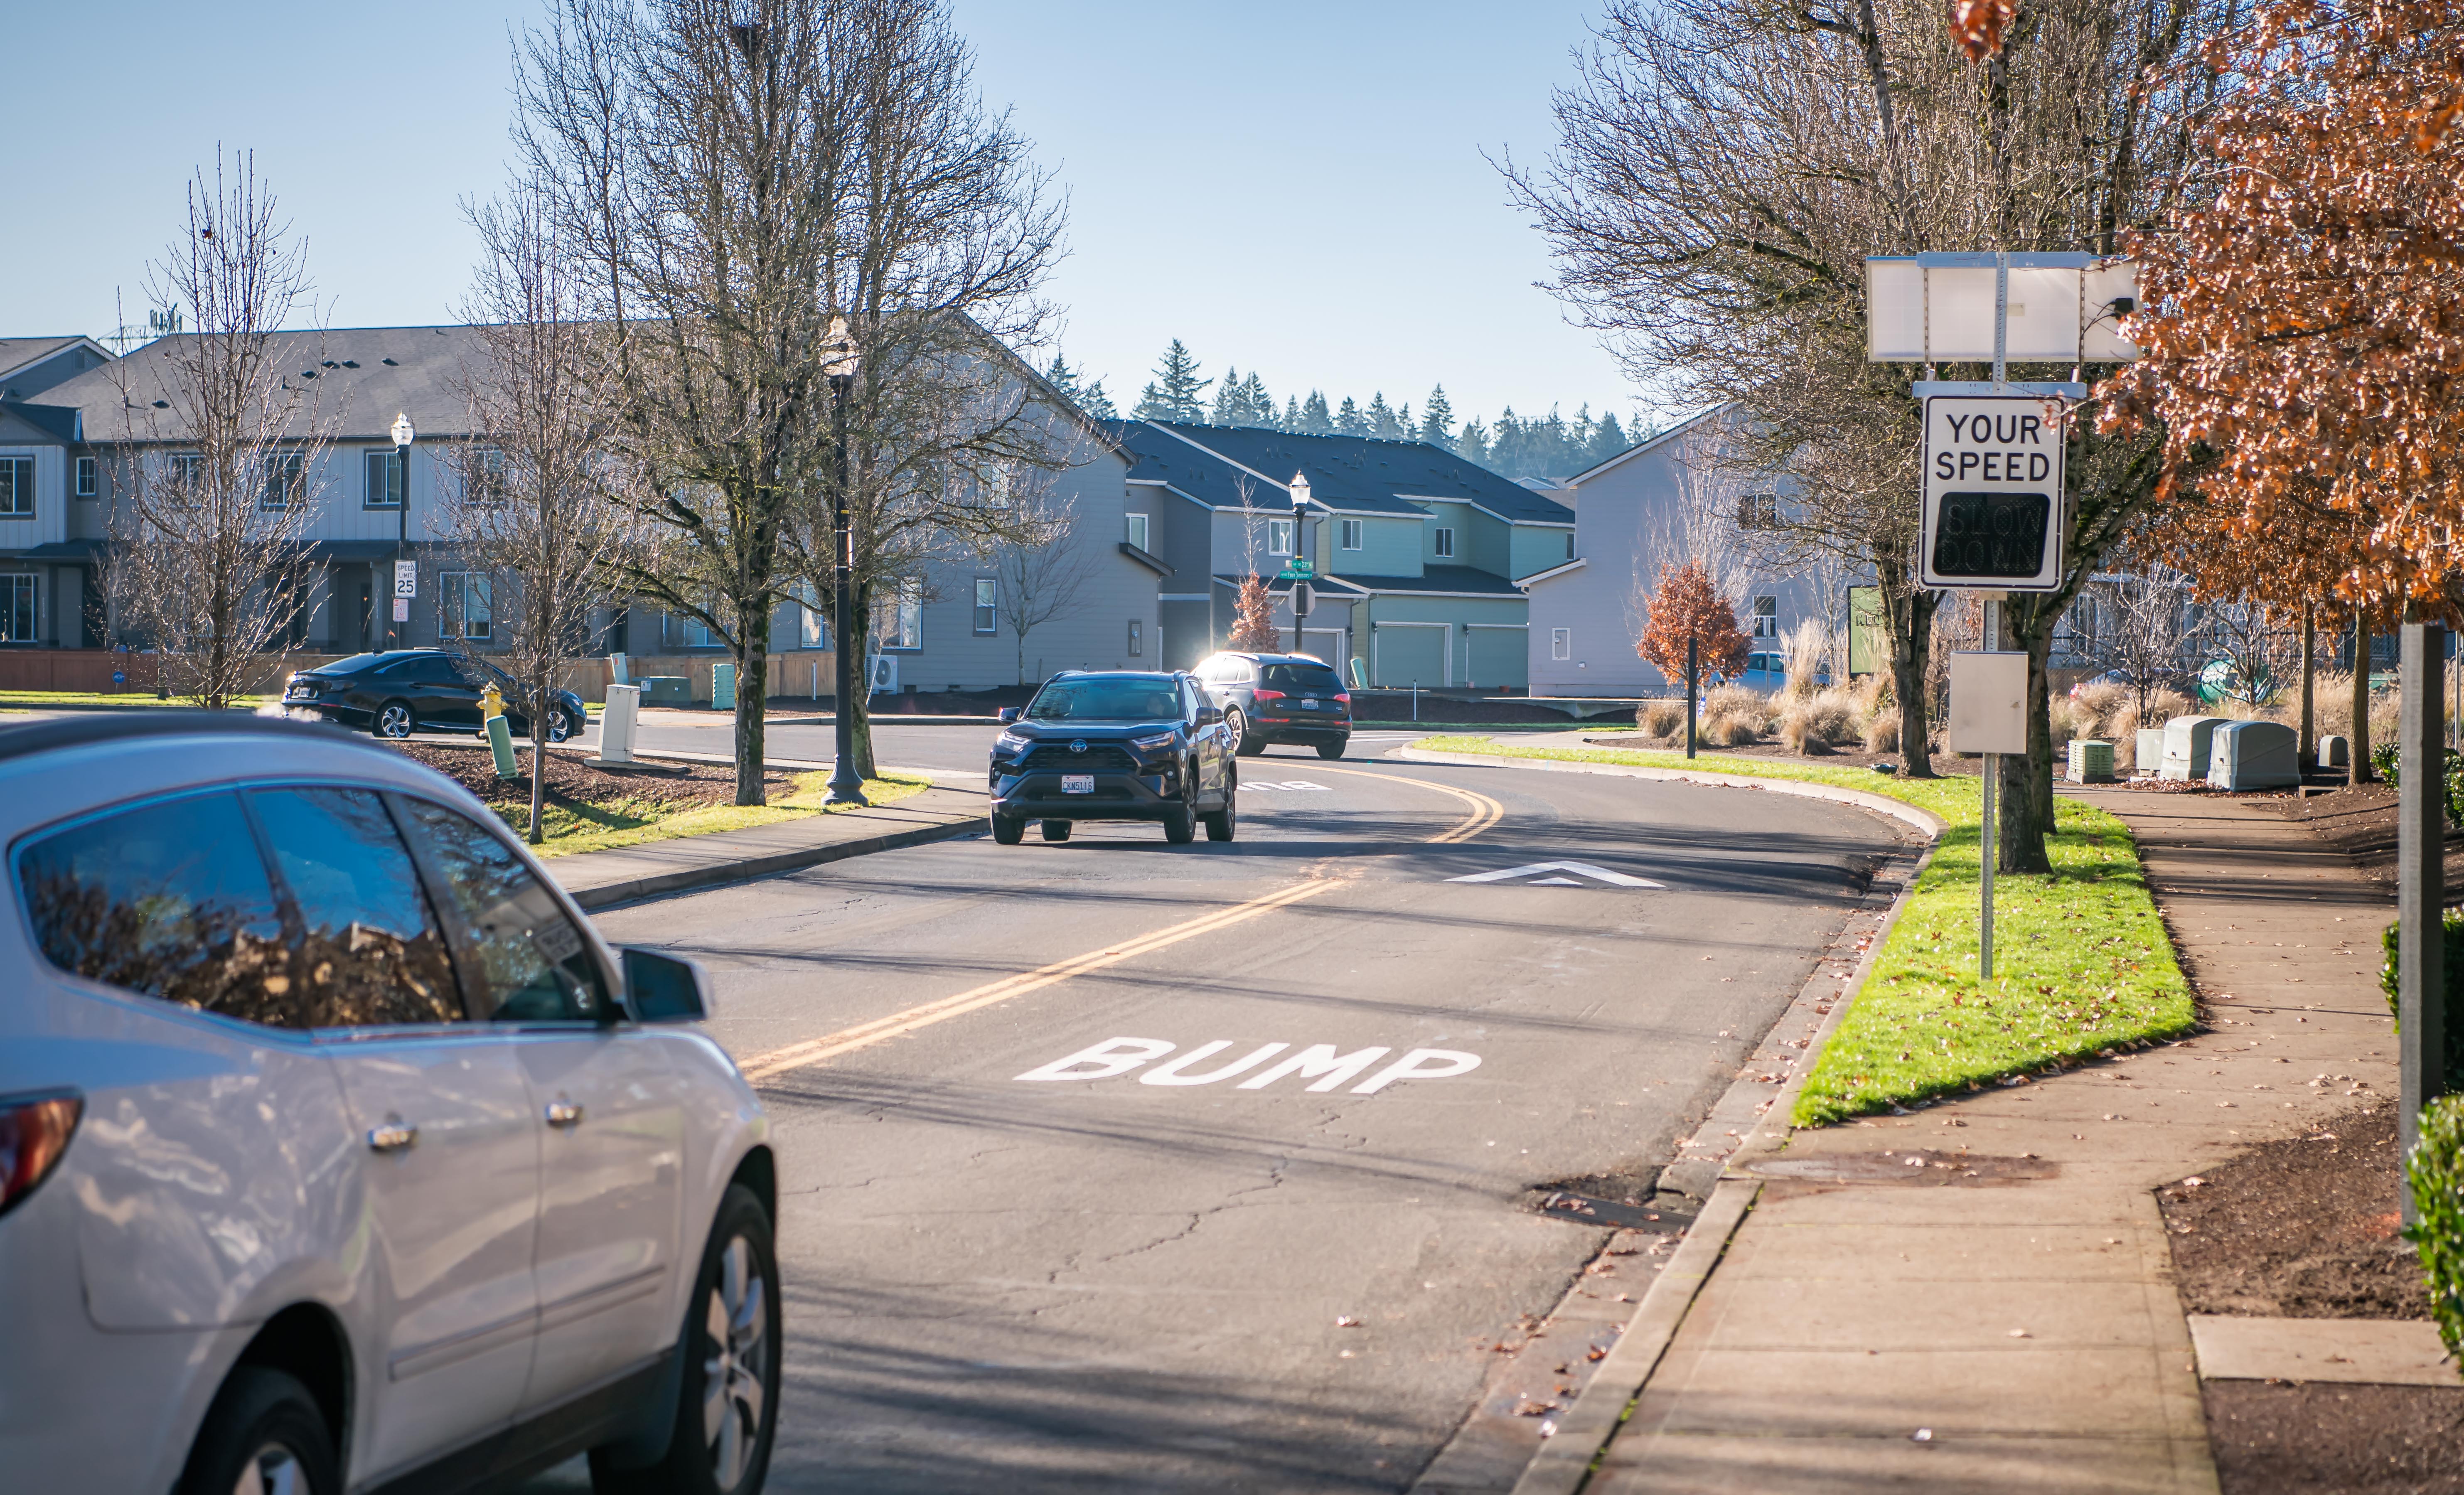 Neighborhood Traffic Calming Program encourages residents to apply for traffic calming measures on local roads